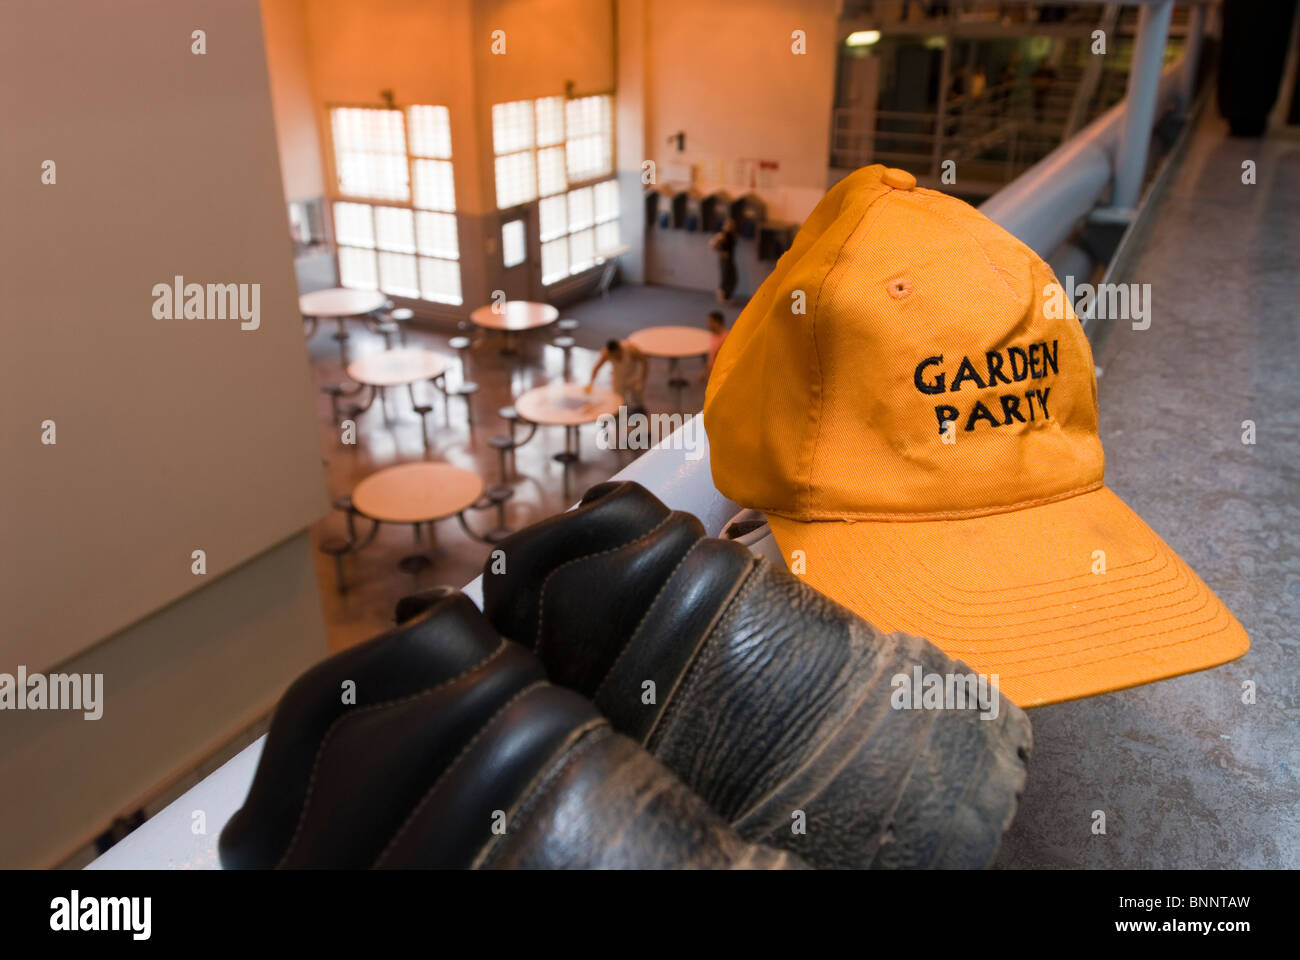 Prison inmates Garden Party cap and boots. Stock Photo